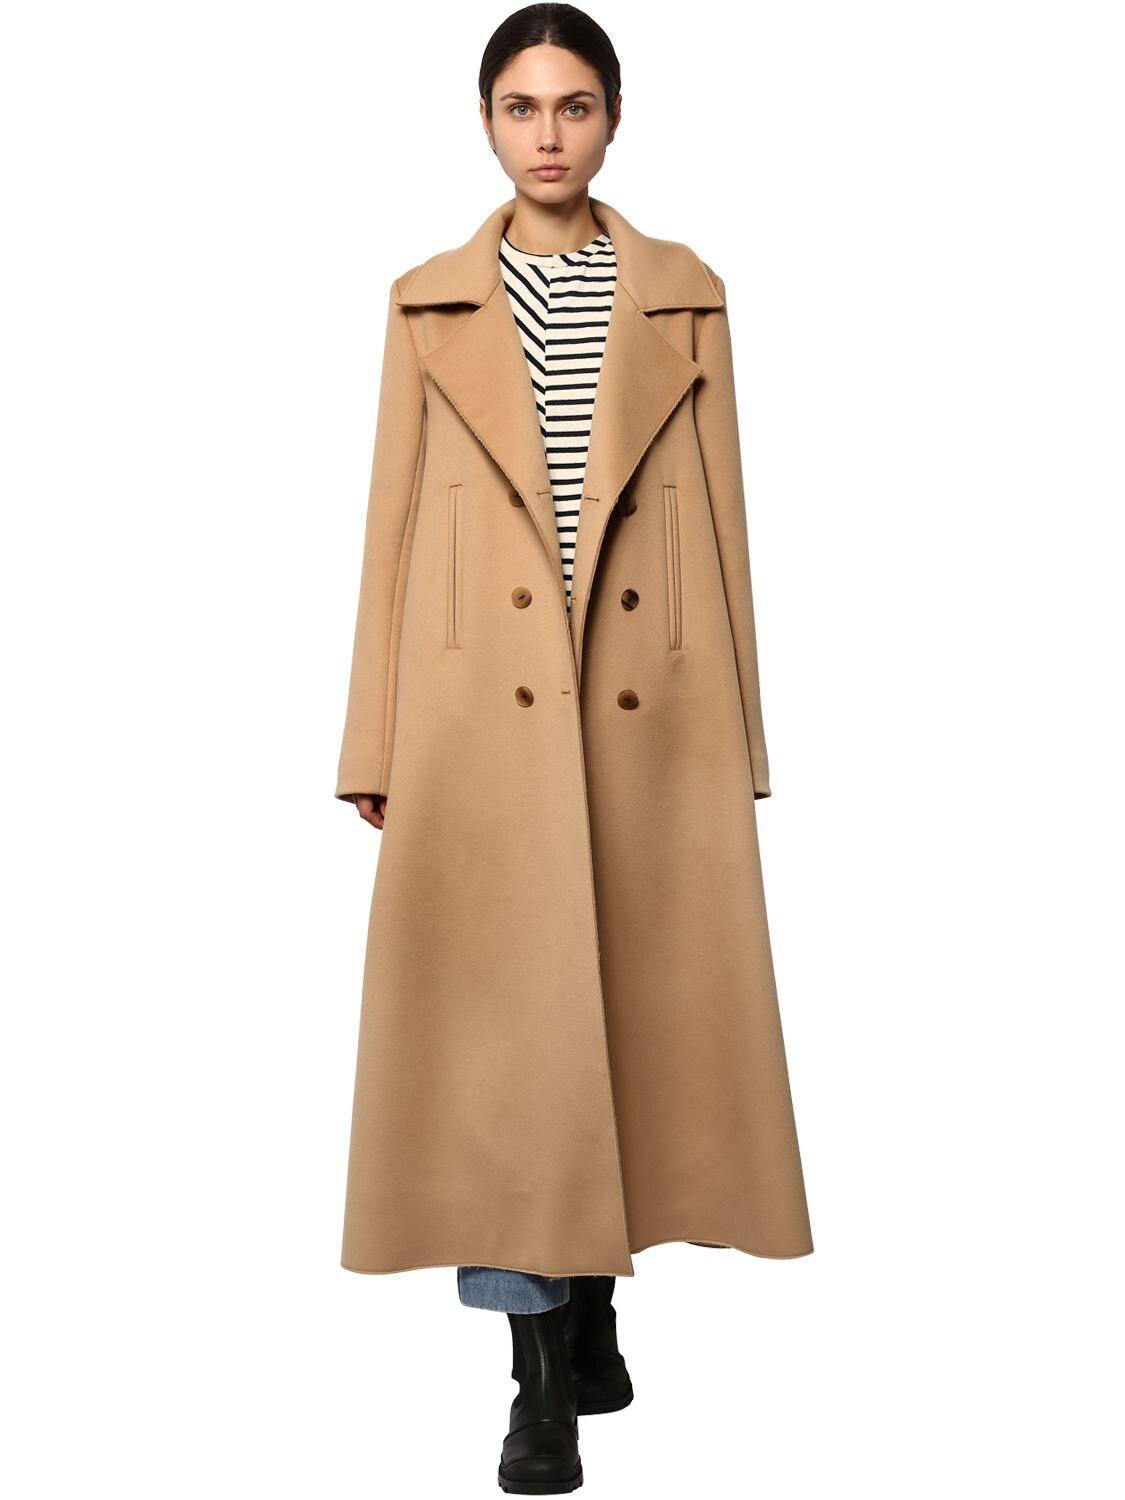 Loewe Double Breast Swing Cashmere Cloth Coat in Camel (Natural) - Lyst